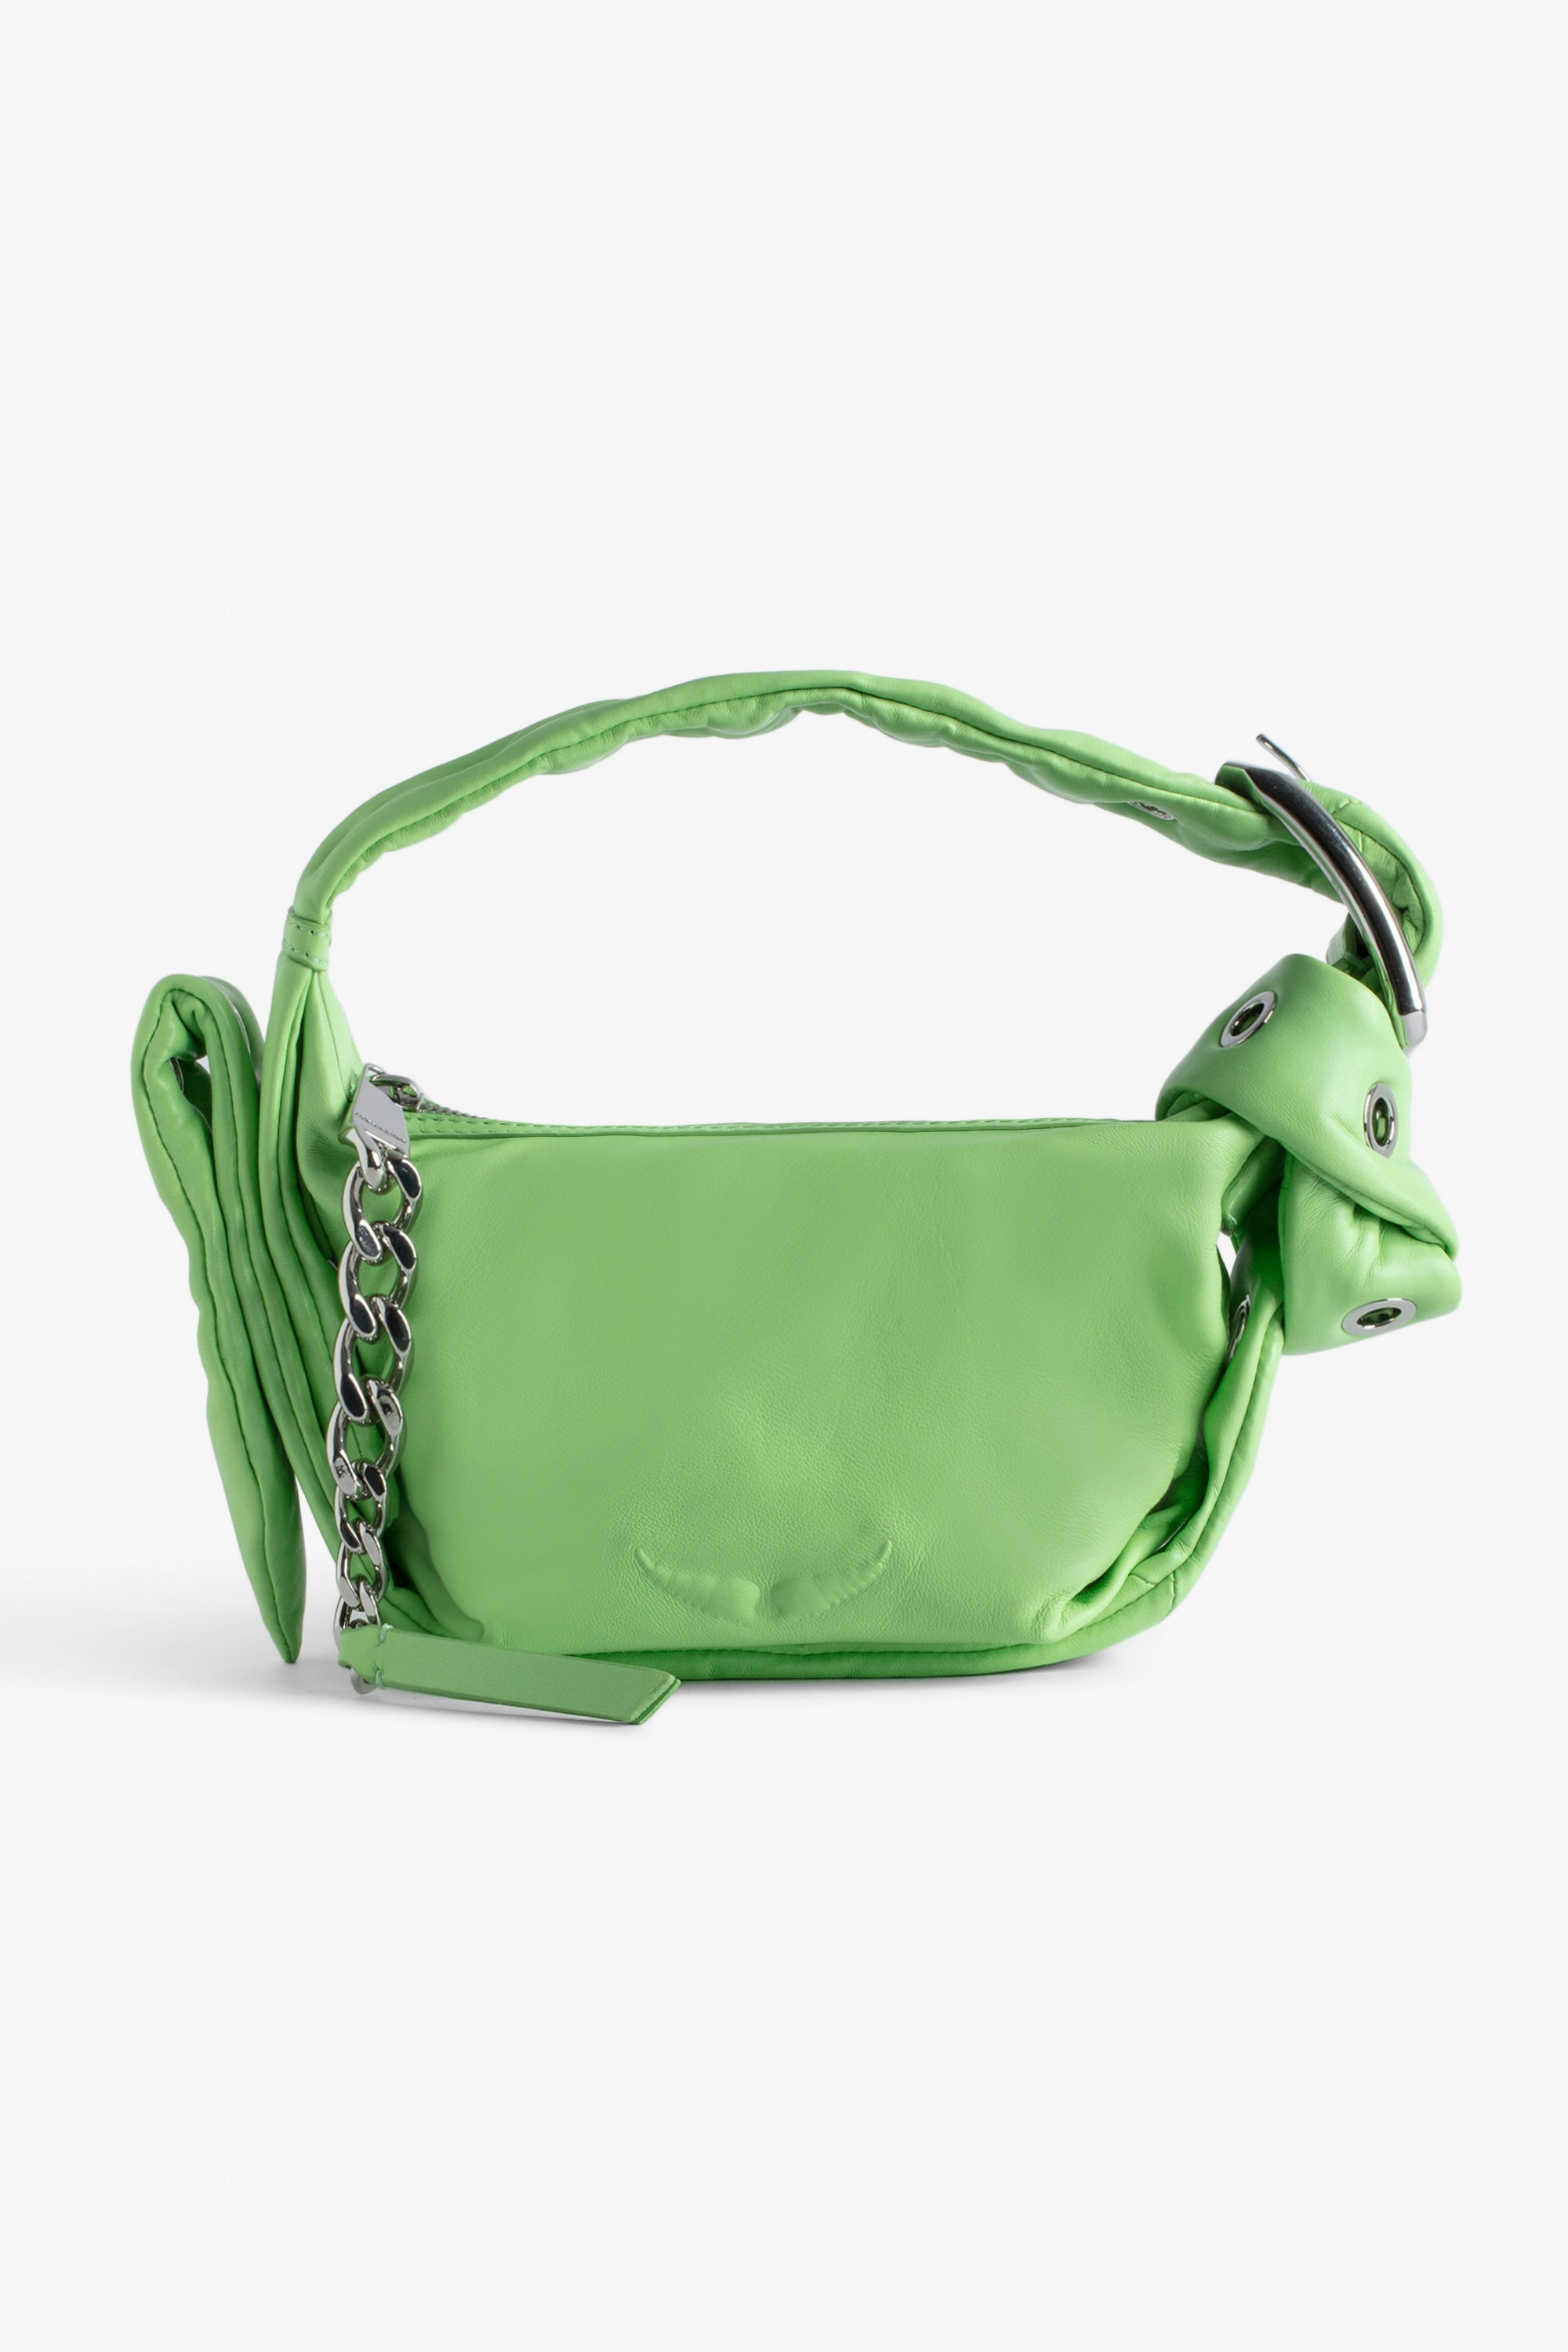 Le Cecilia XS Obsession Bag - Women’s small green smooth leather bag with shoulder strap and metal C buckle.